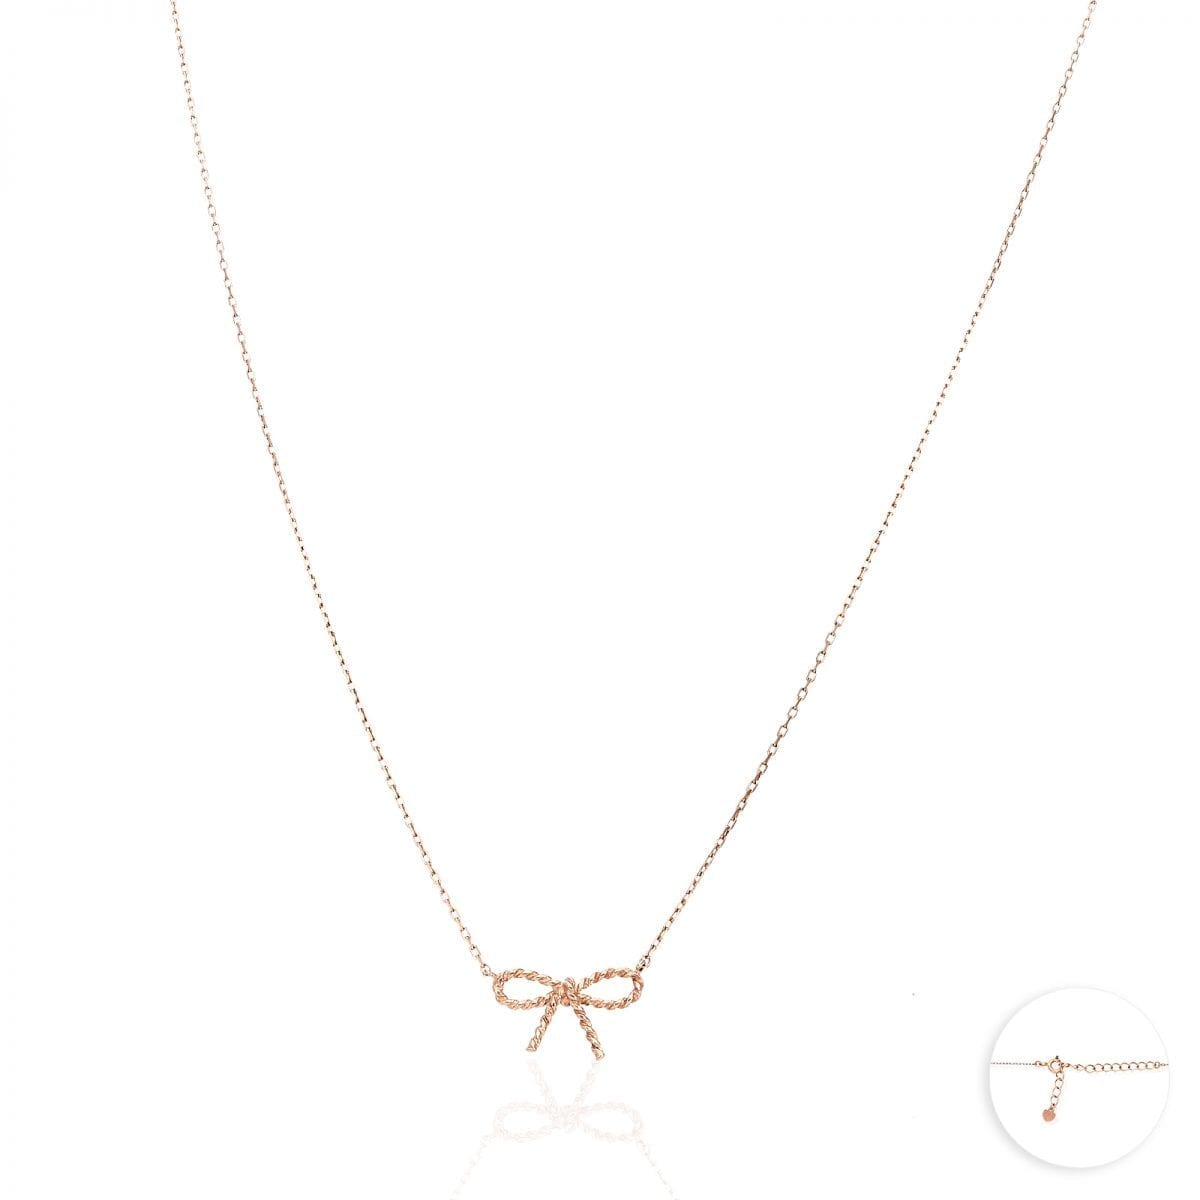 14K Yellow & Rose Gold 925 Sterling Silver Bow Cable Necklace 16"-18" Adjustable - Rose Gold Plated